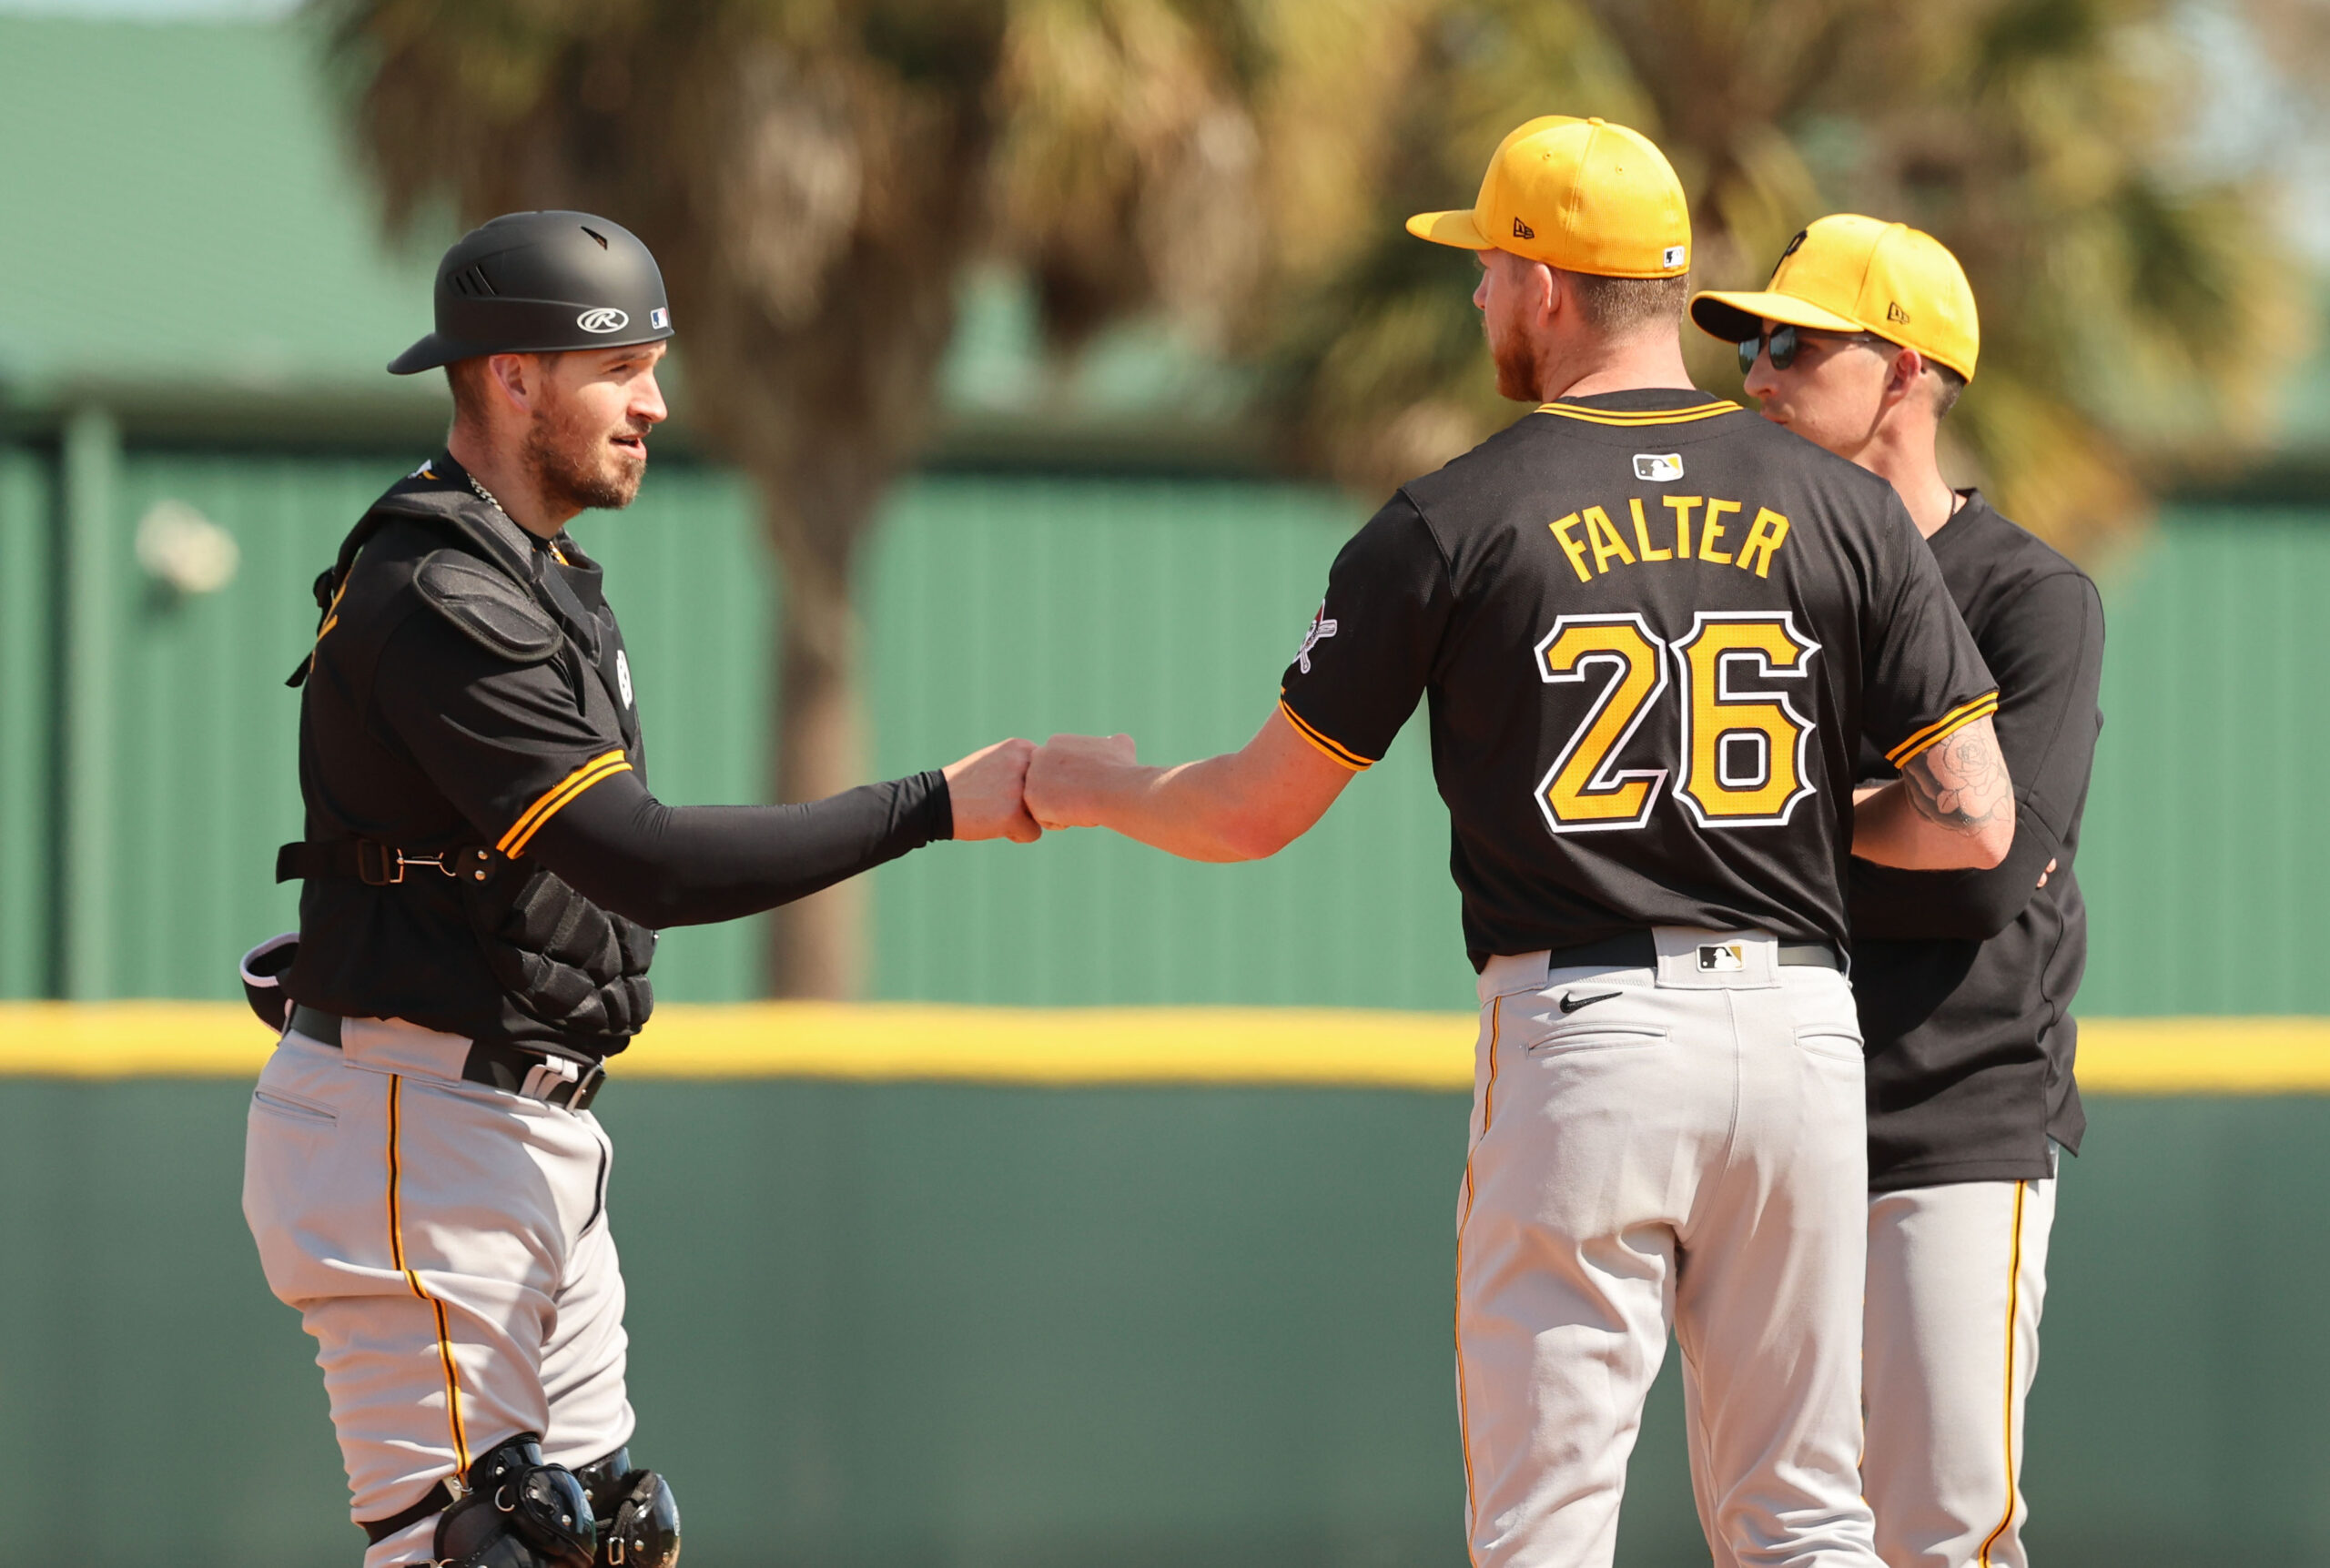 Pirates Activate Veteran Catcher, Send Former No. 1 Draft Pick to Minors